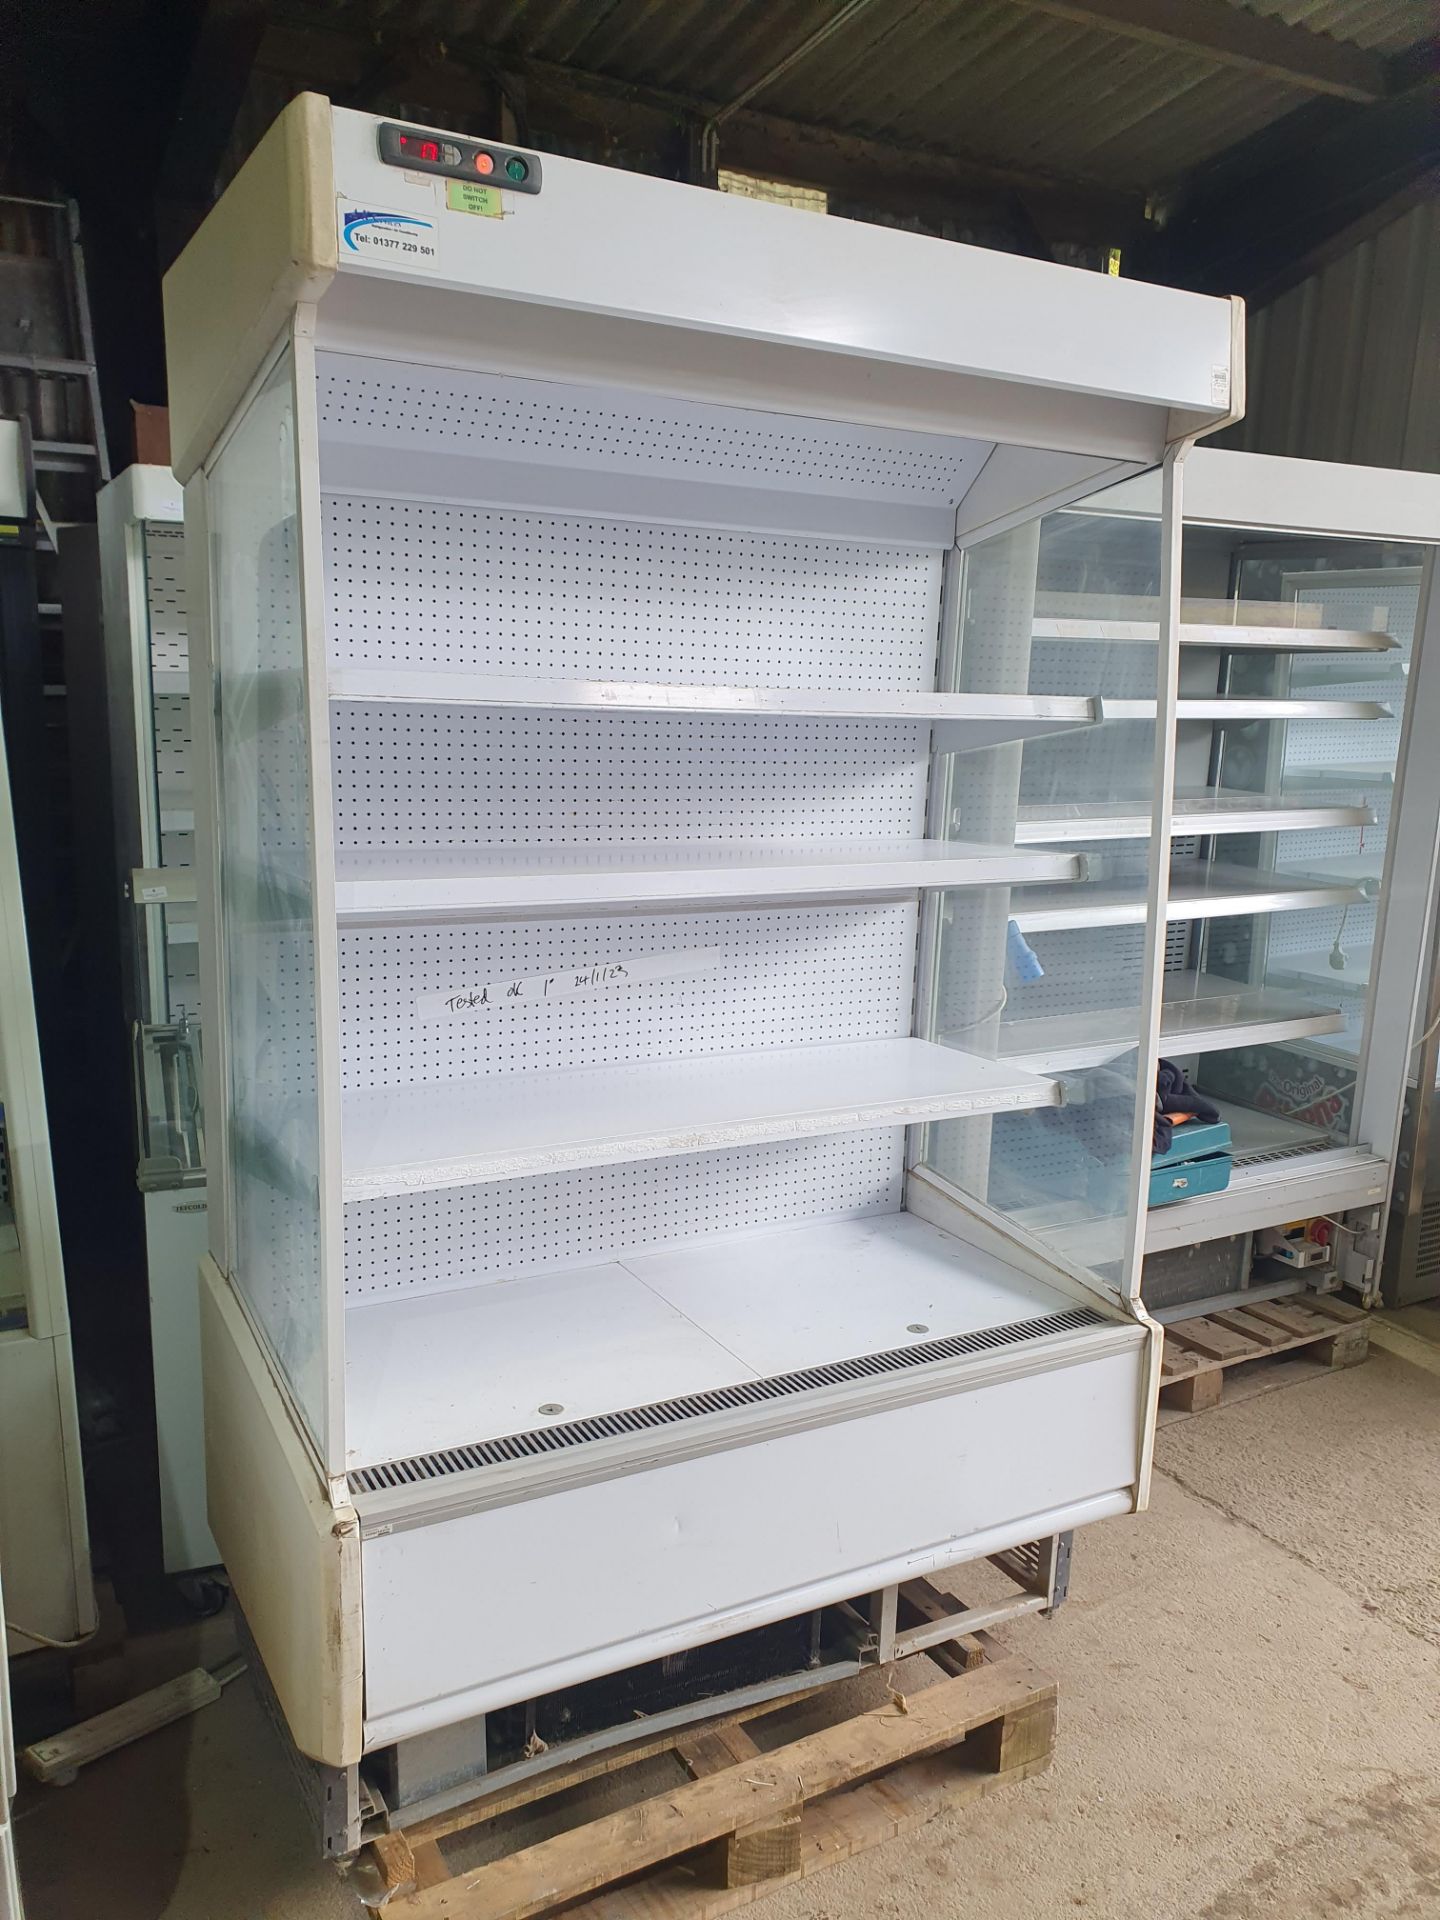 *Fritixa multideck, base and 3 shelves, tested working. 1300w x 760d x 2020h